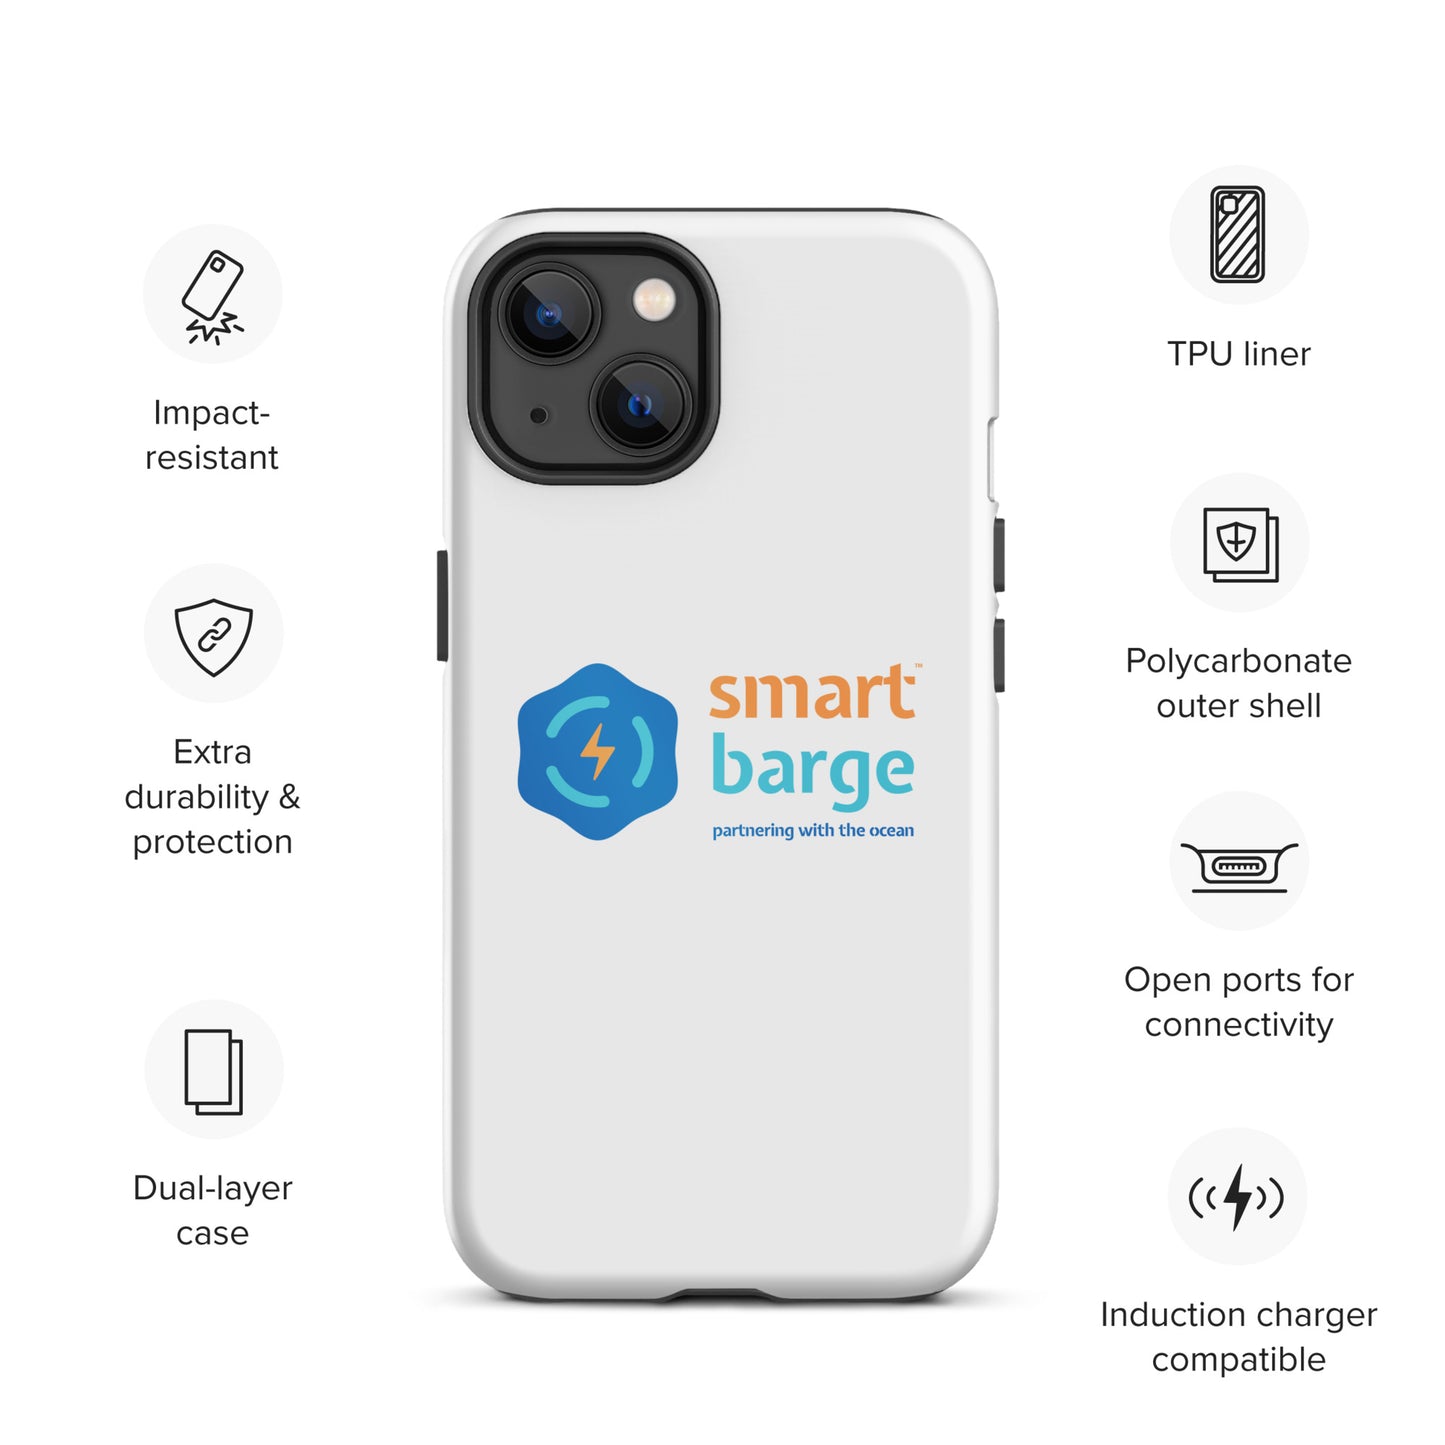 Smart Barge 'Partnering With The Ocean' Phone Case